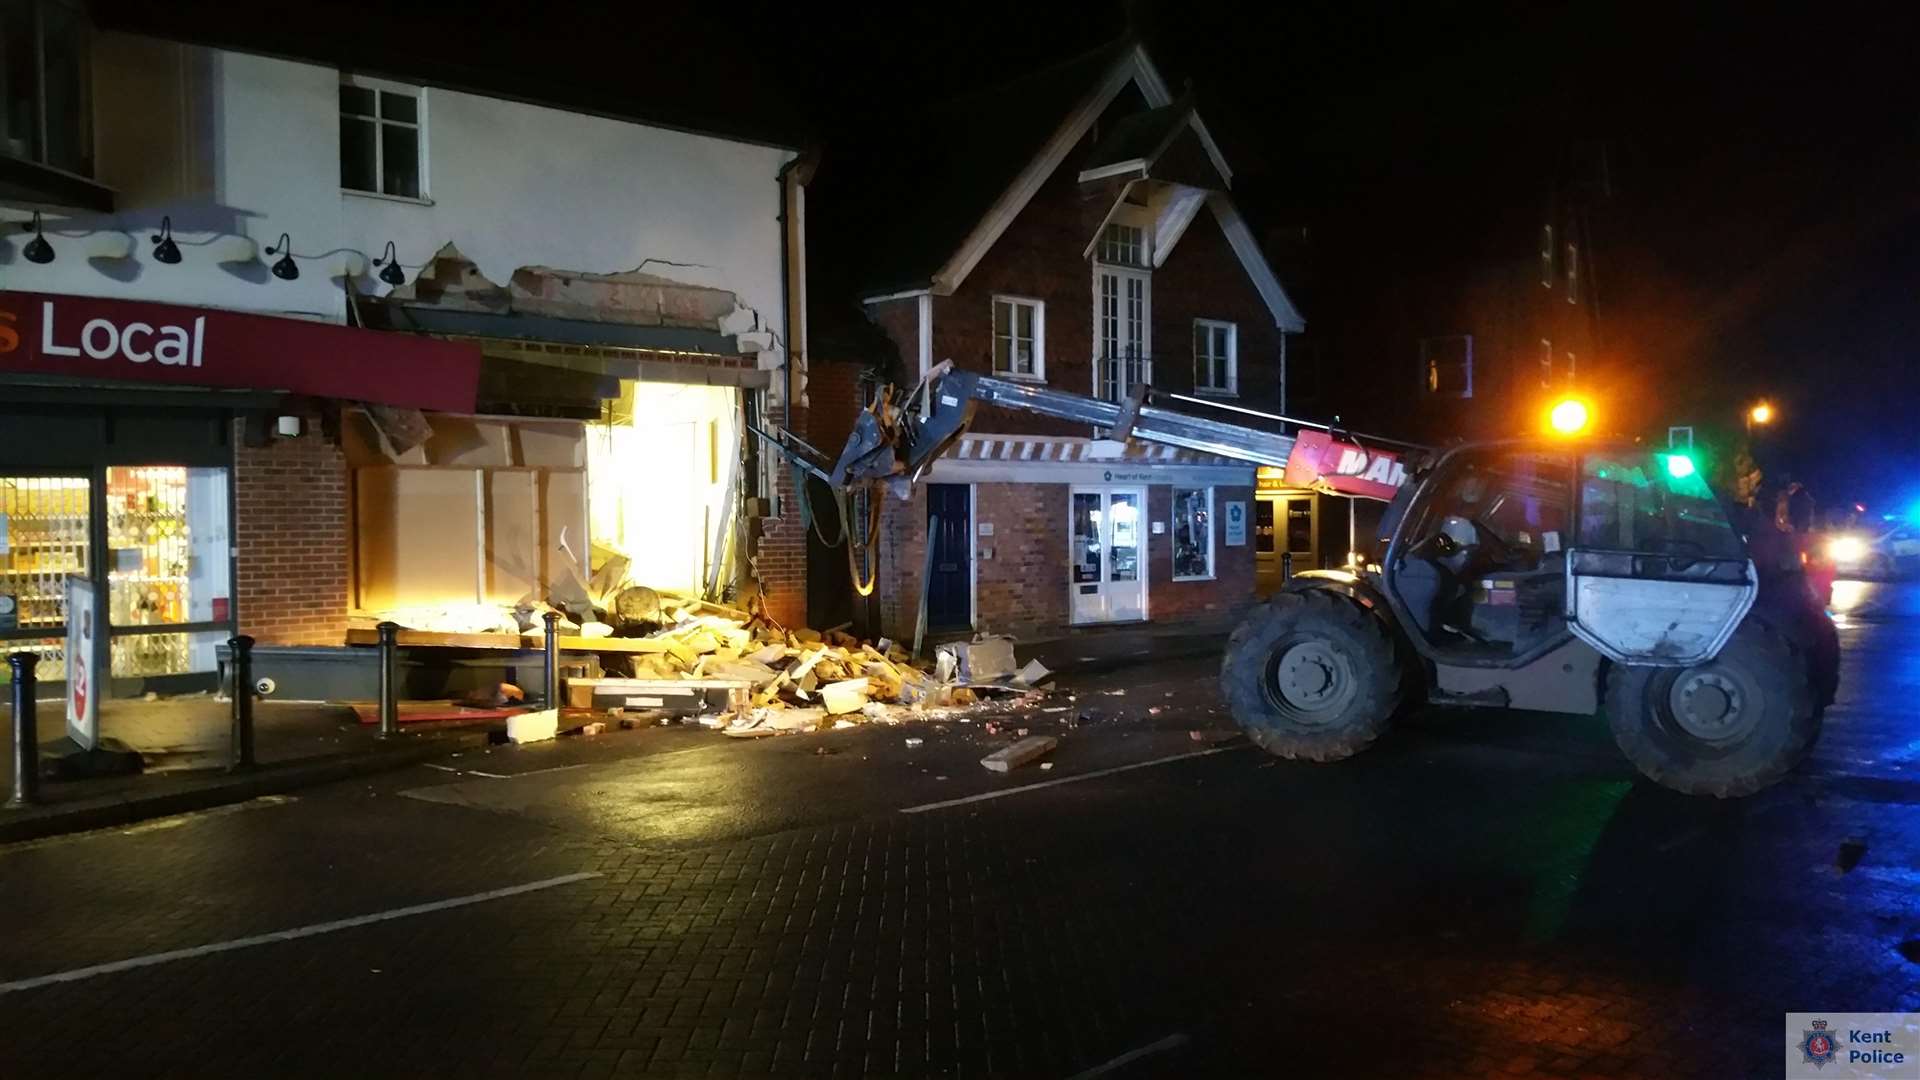 The thieves used a vehicle known as a telehandler, or boom lift, to wrench out the cash machine